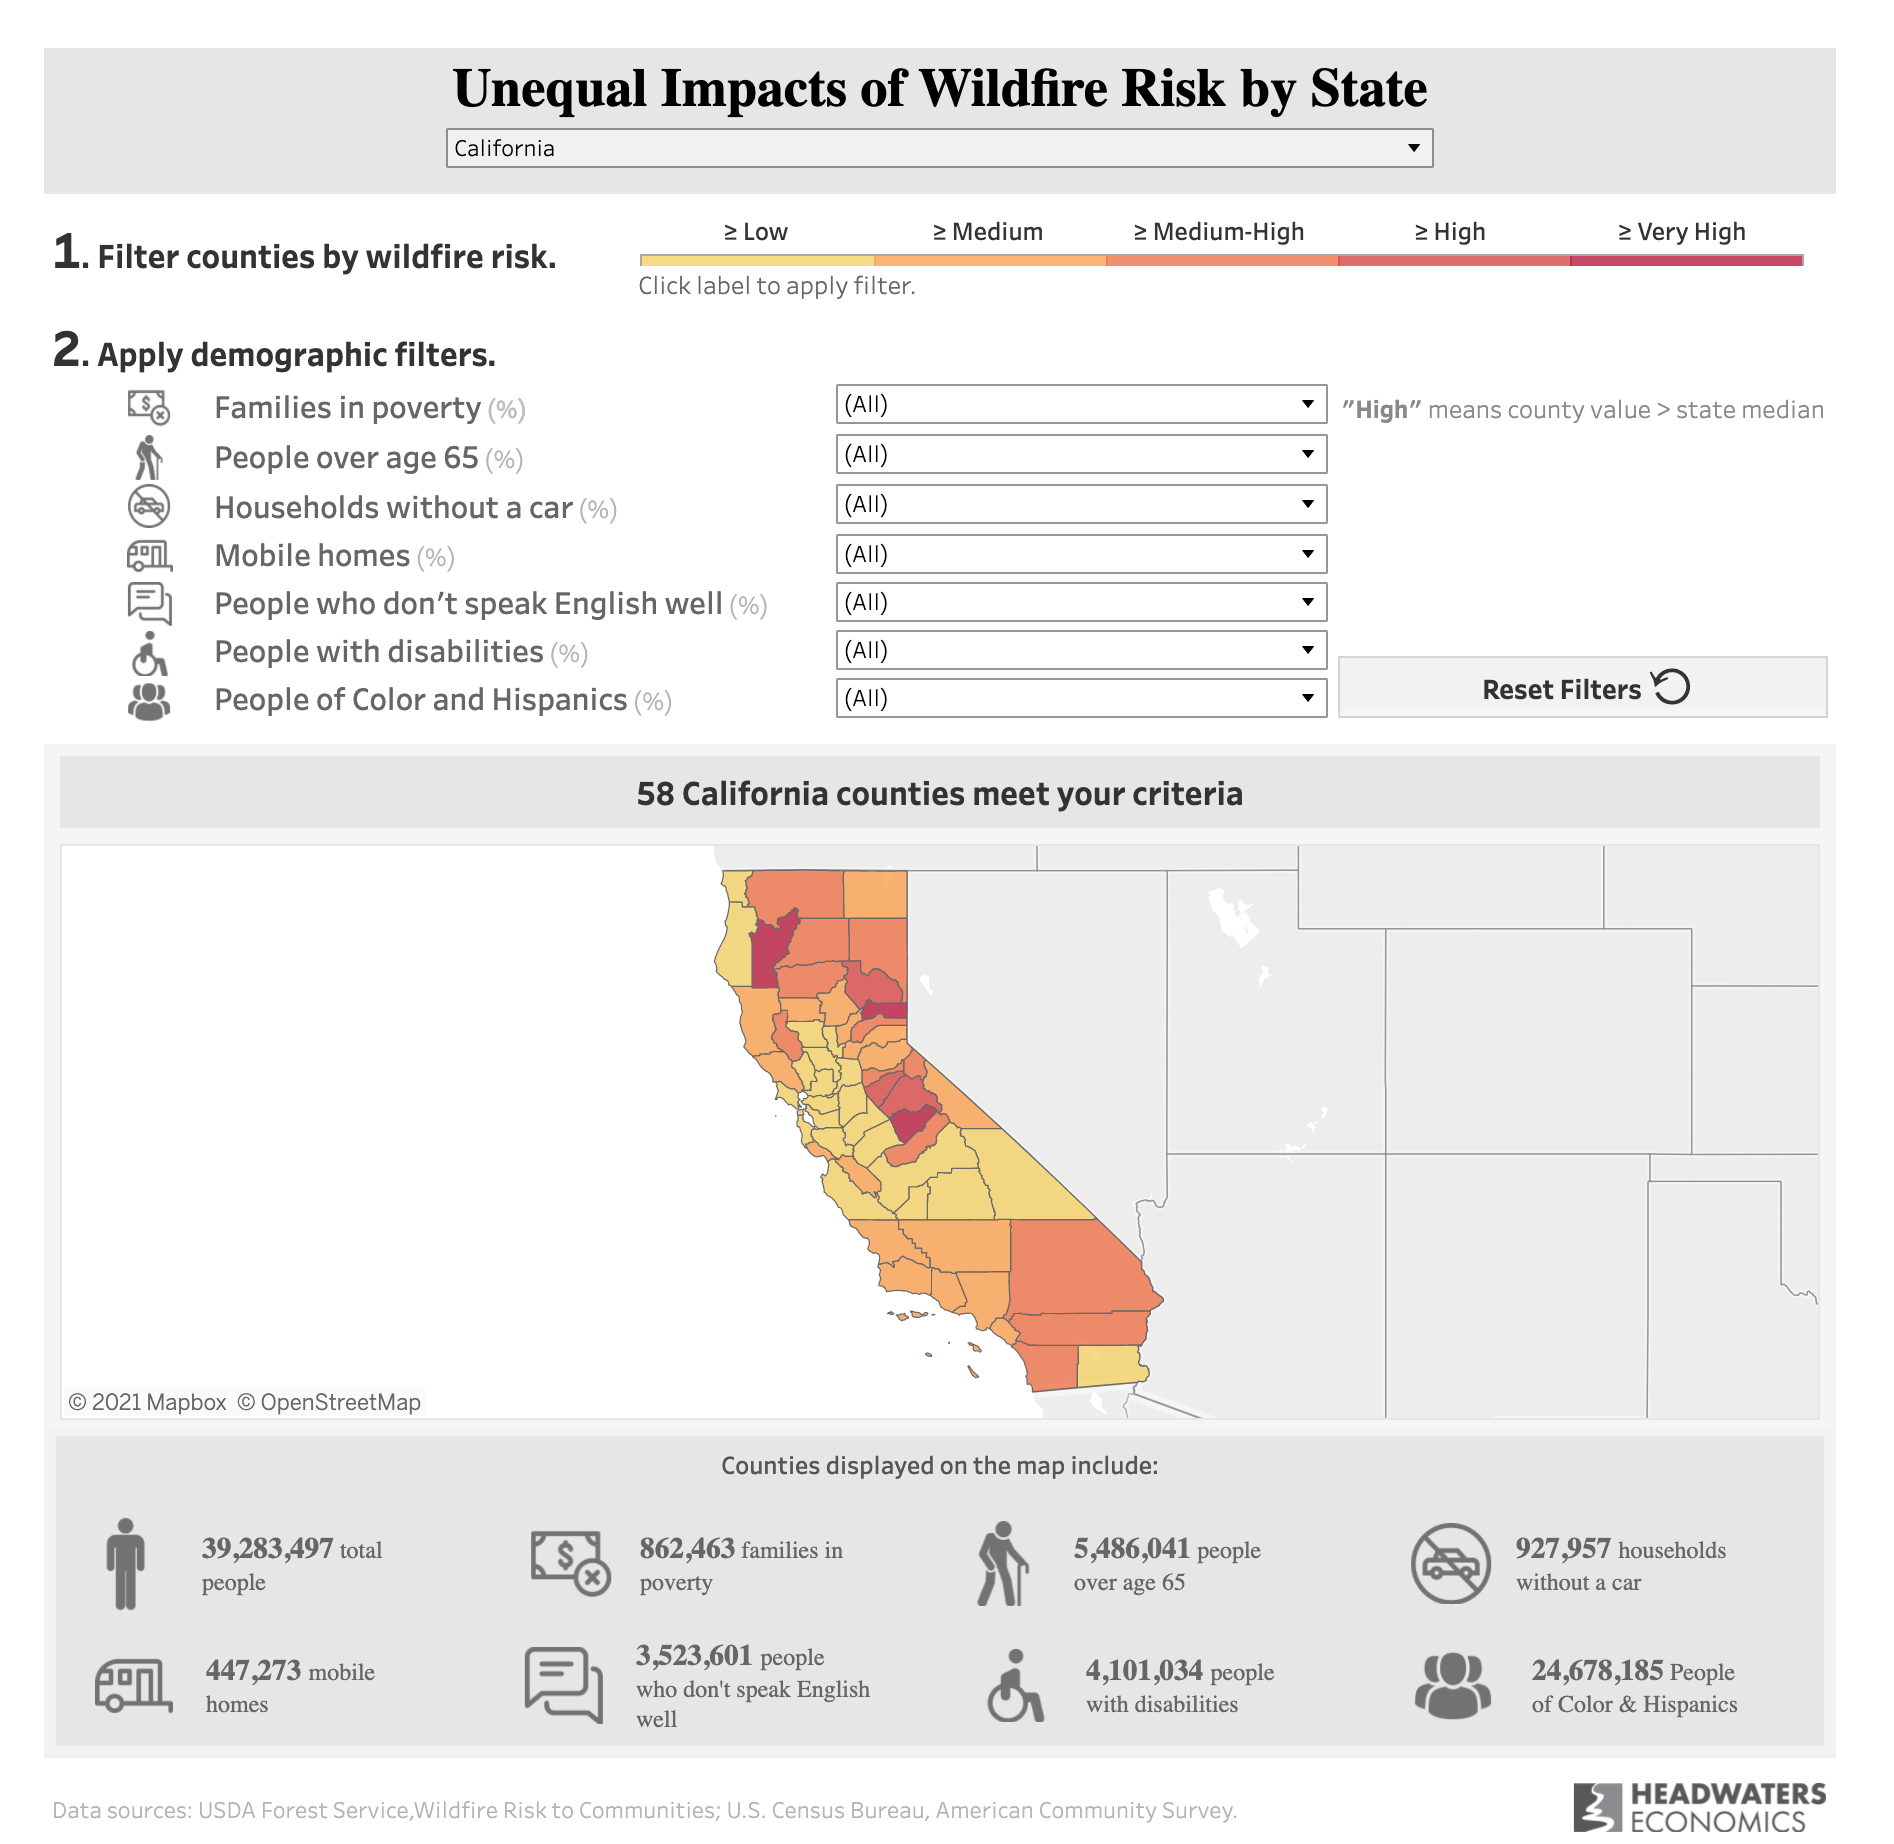 Unequal Impacts of Wildfire by State dashboard